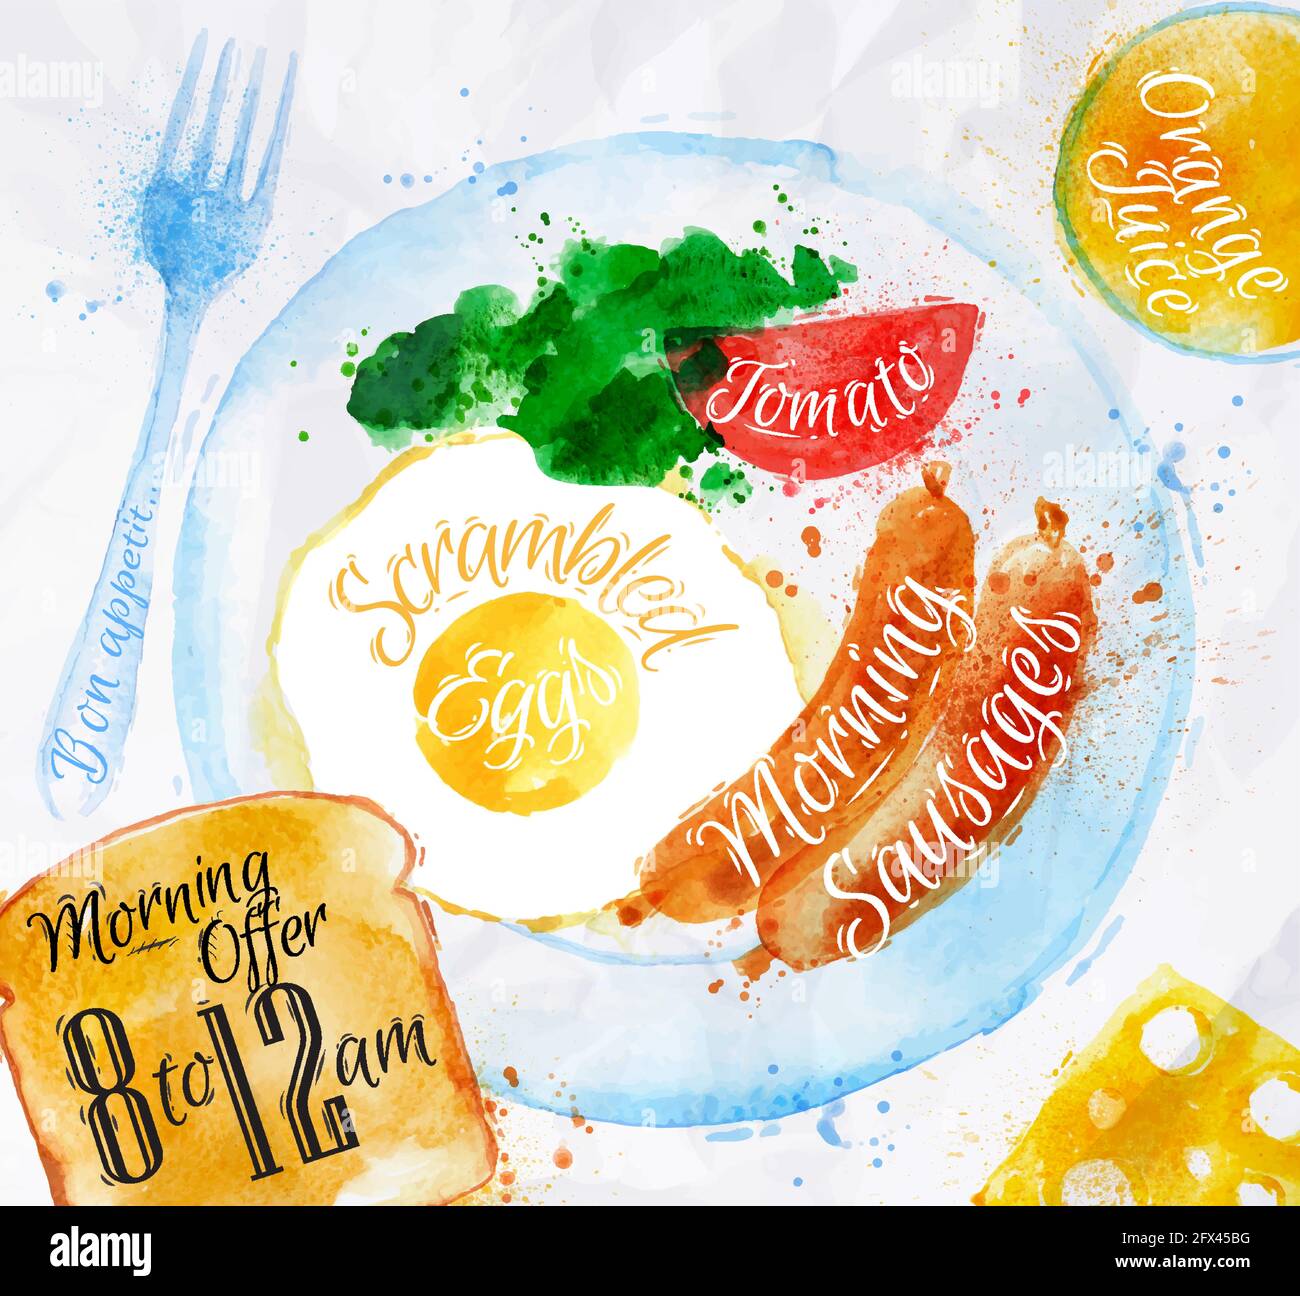 Breakfast painted with watercolors on a plate eggs sausage tomato salad fork a glass of juice, toast with text friction offers from 8 to 12am Stock Vector